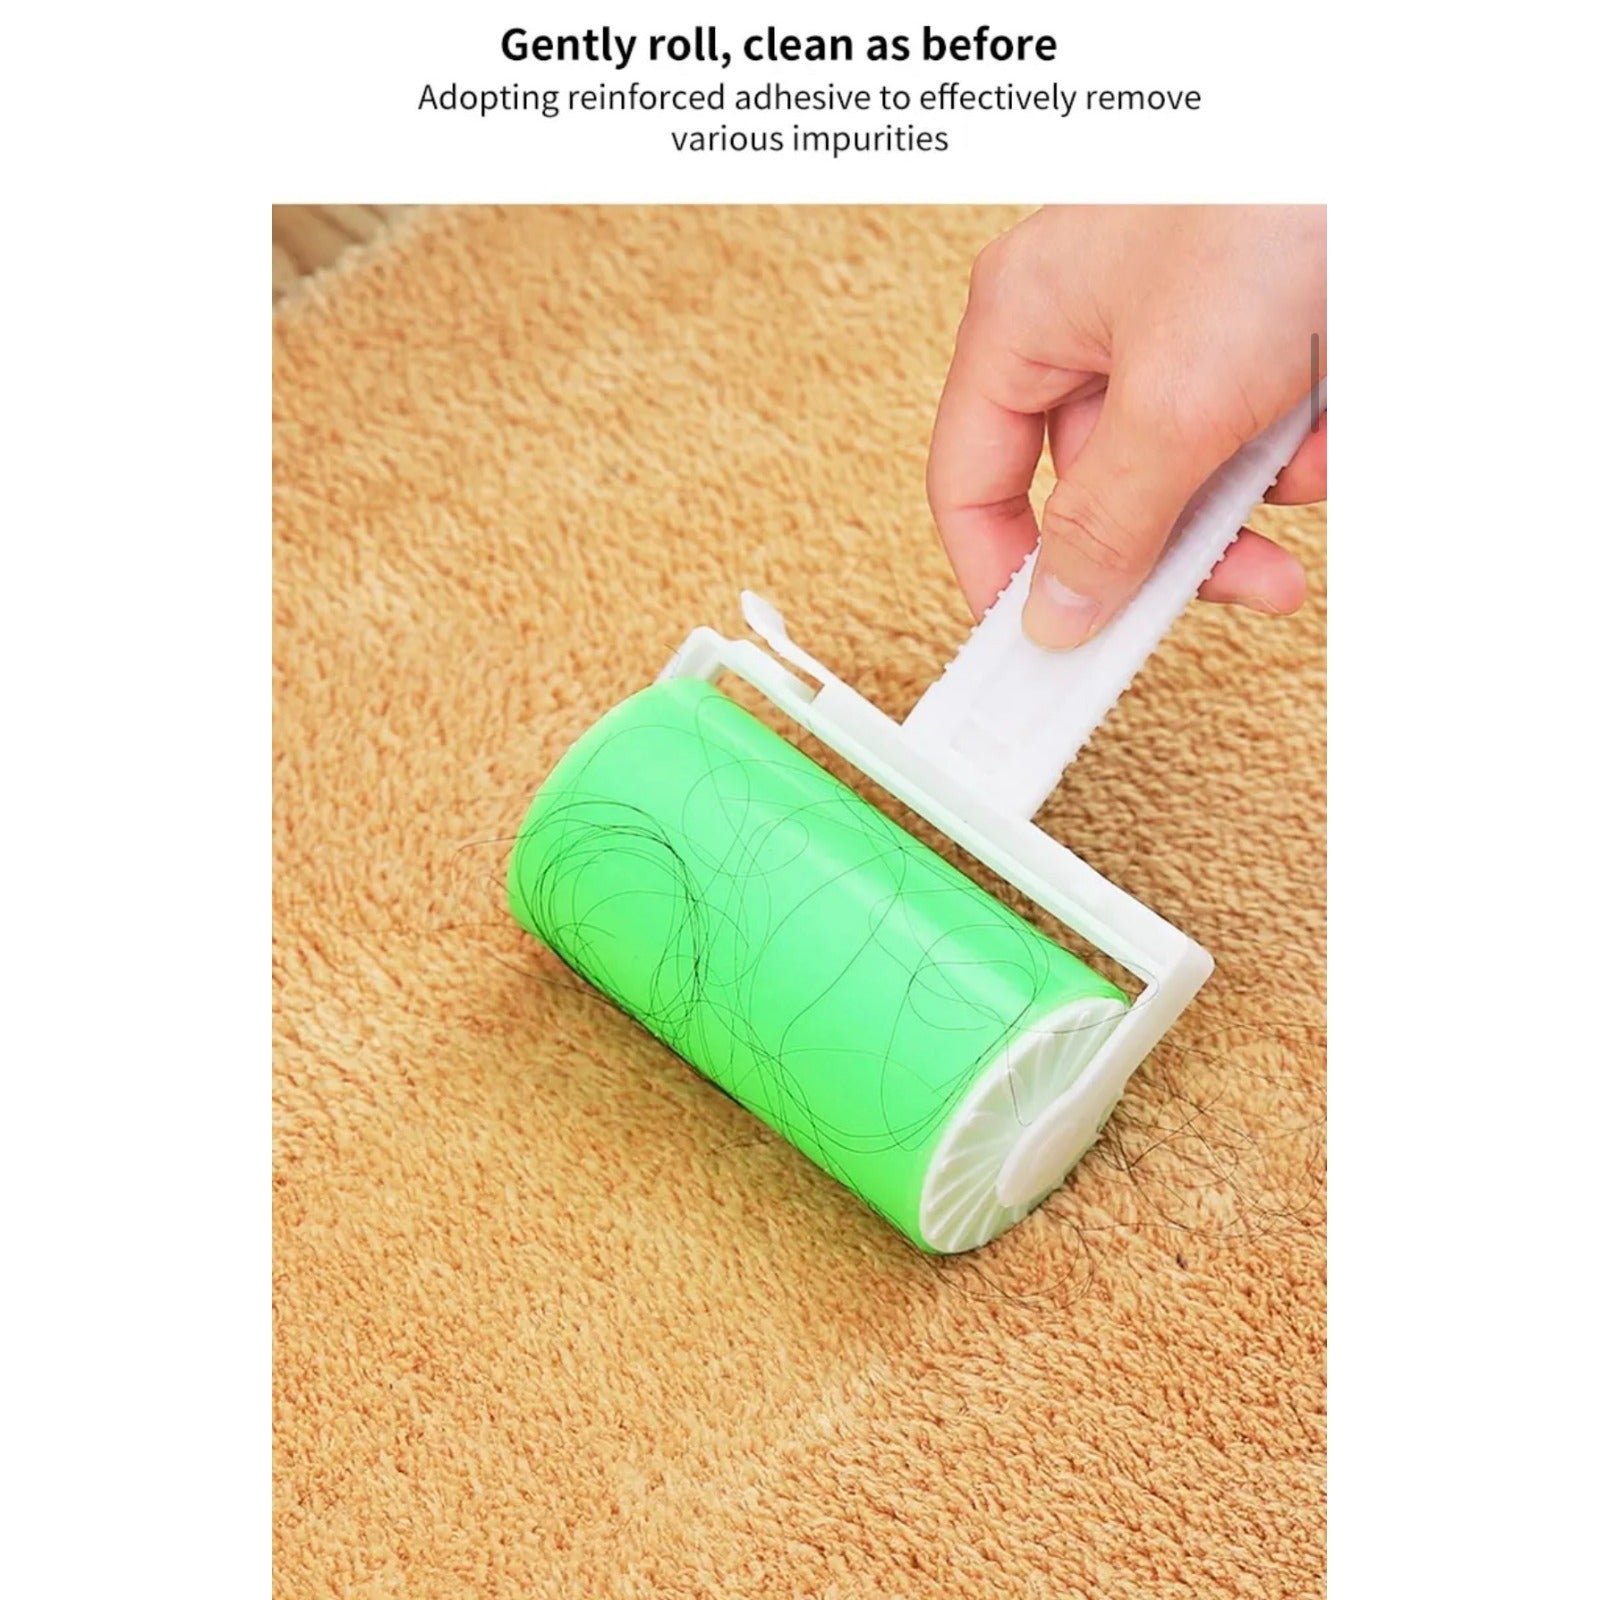 Sticky Washable Lint Roller, Reusable Lint Remover Balls, Bell Shape  Sustainable Laundry Supplies, Detergent Alternative Laundry Dryer, Washing